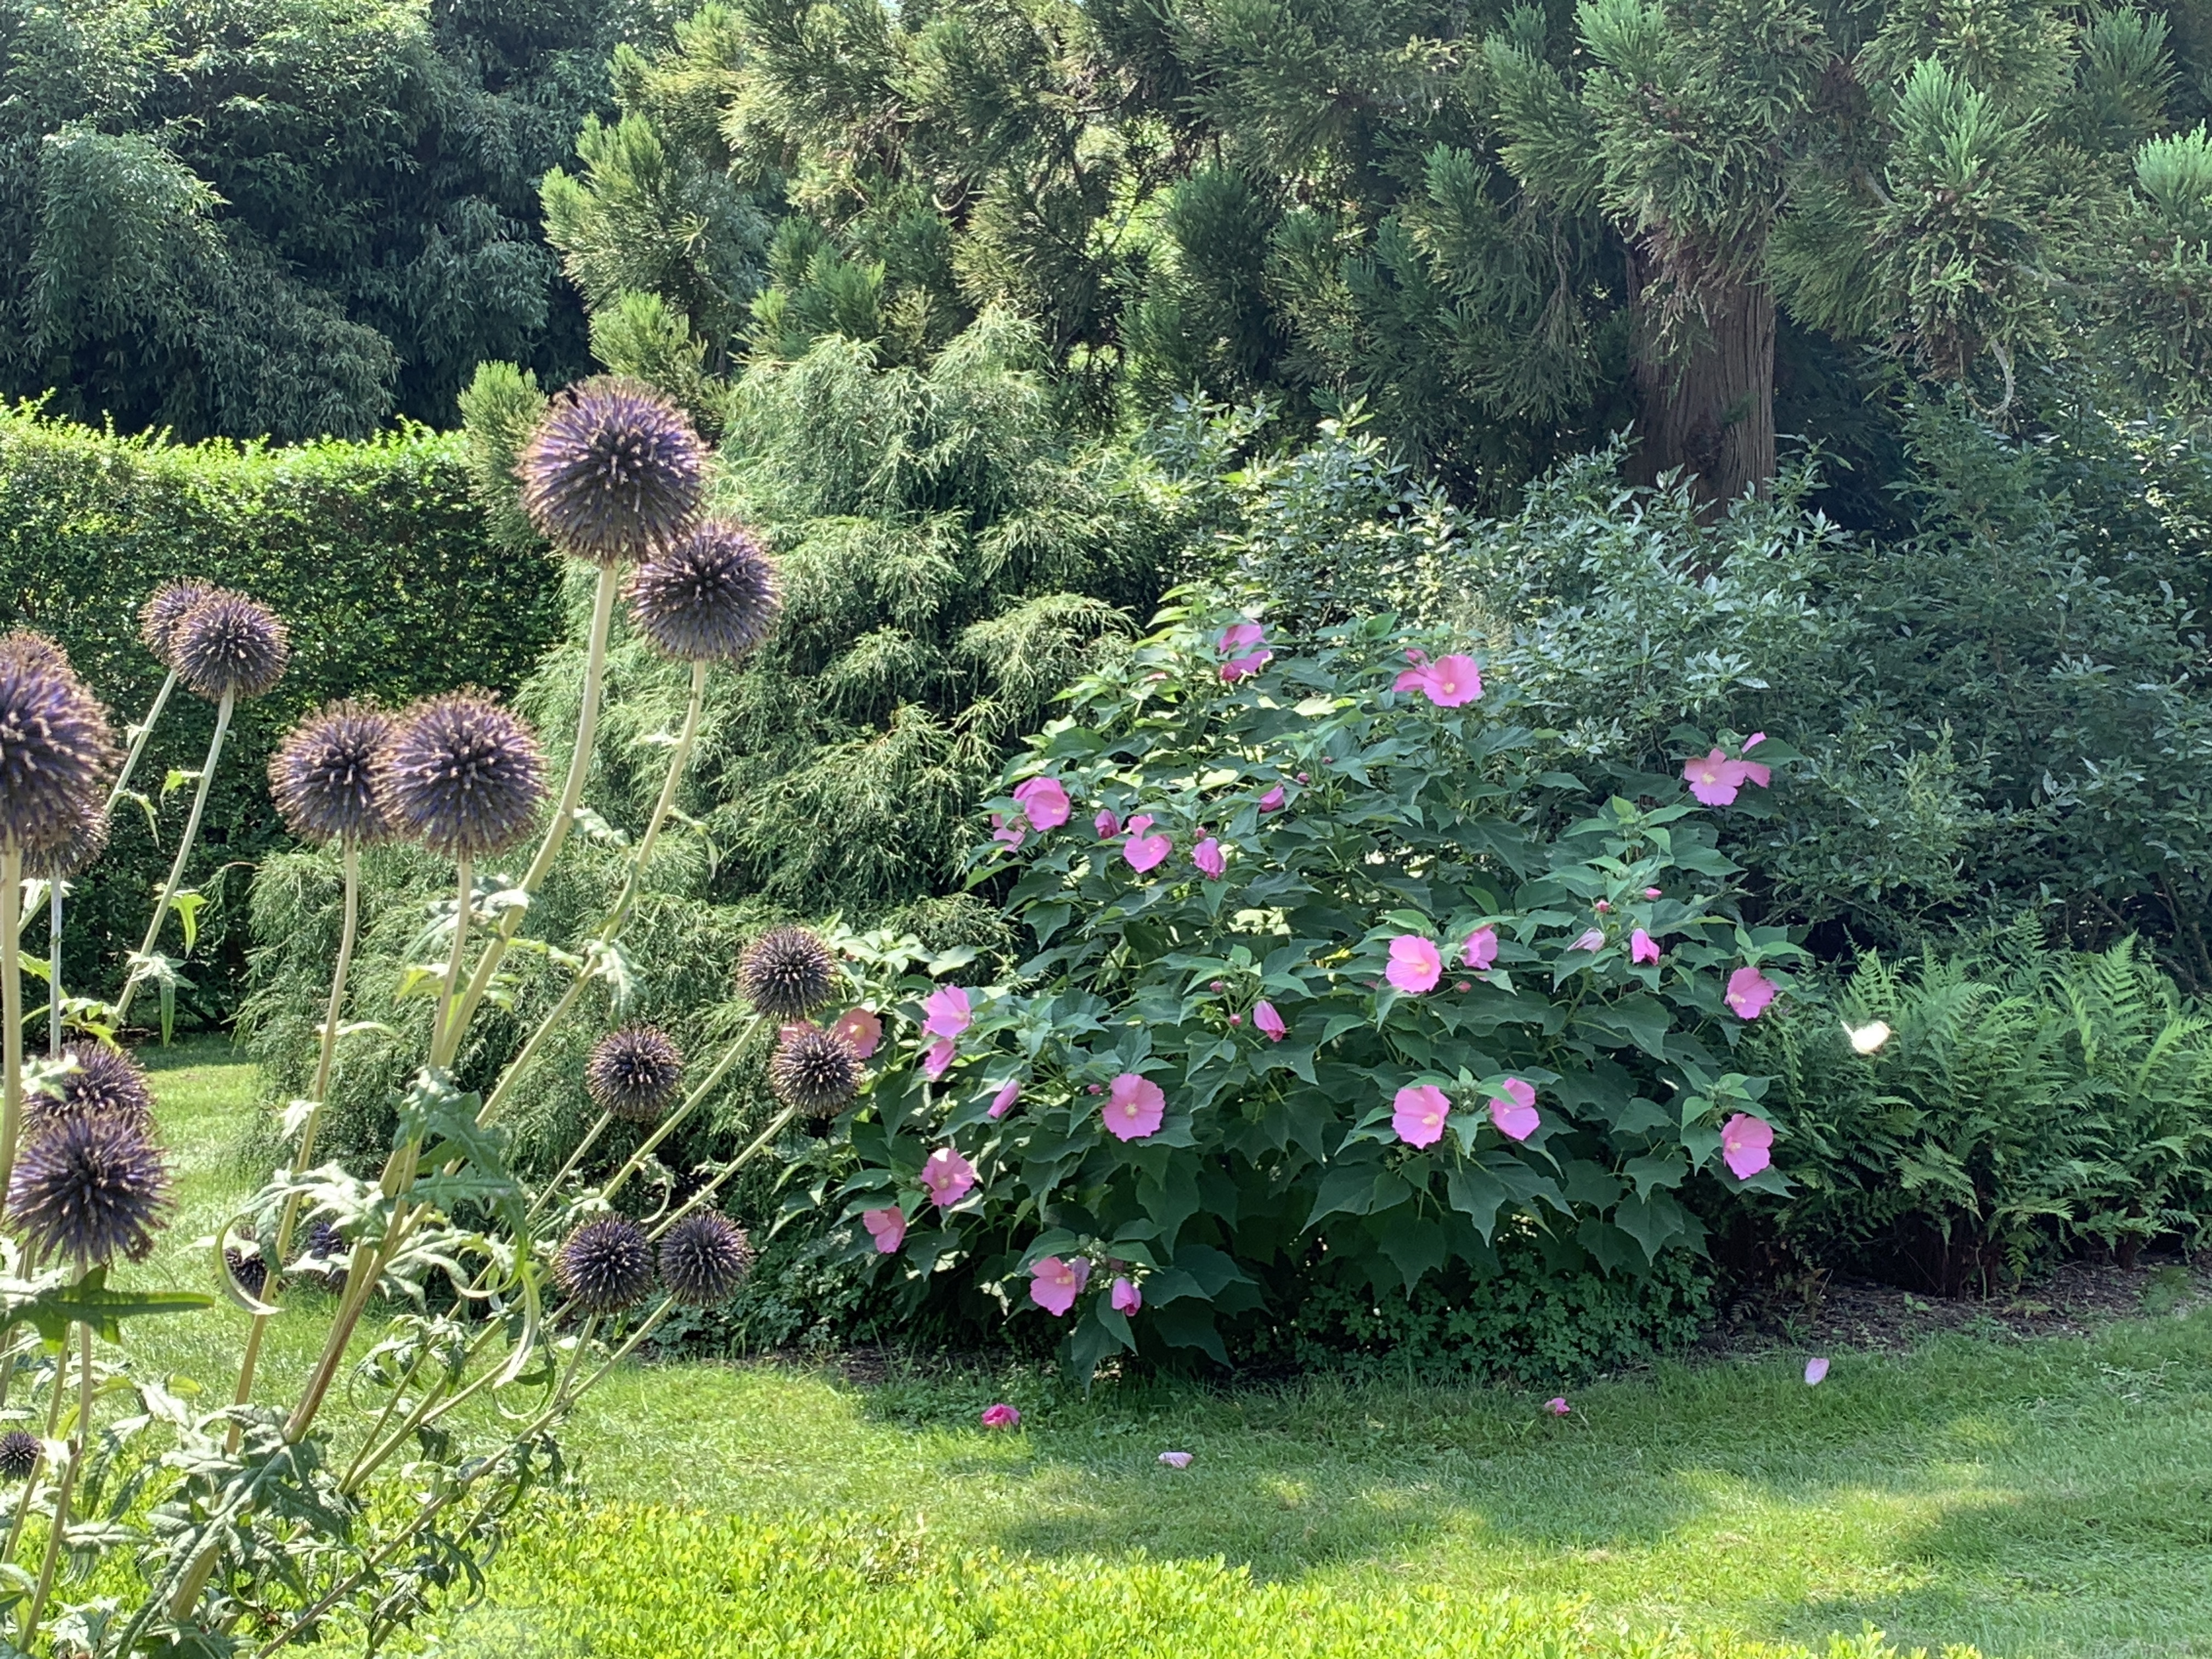 Globe thistle and pink rose mallow